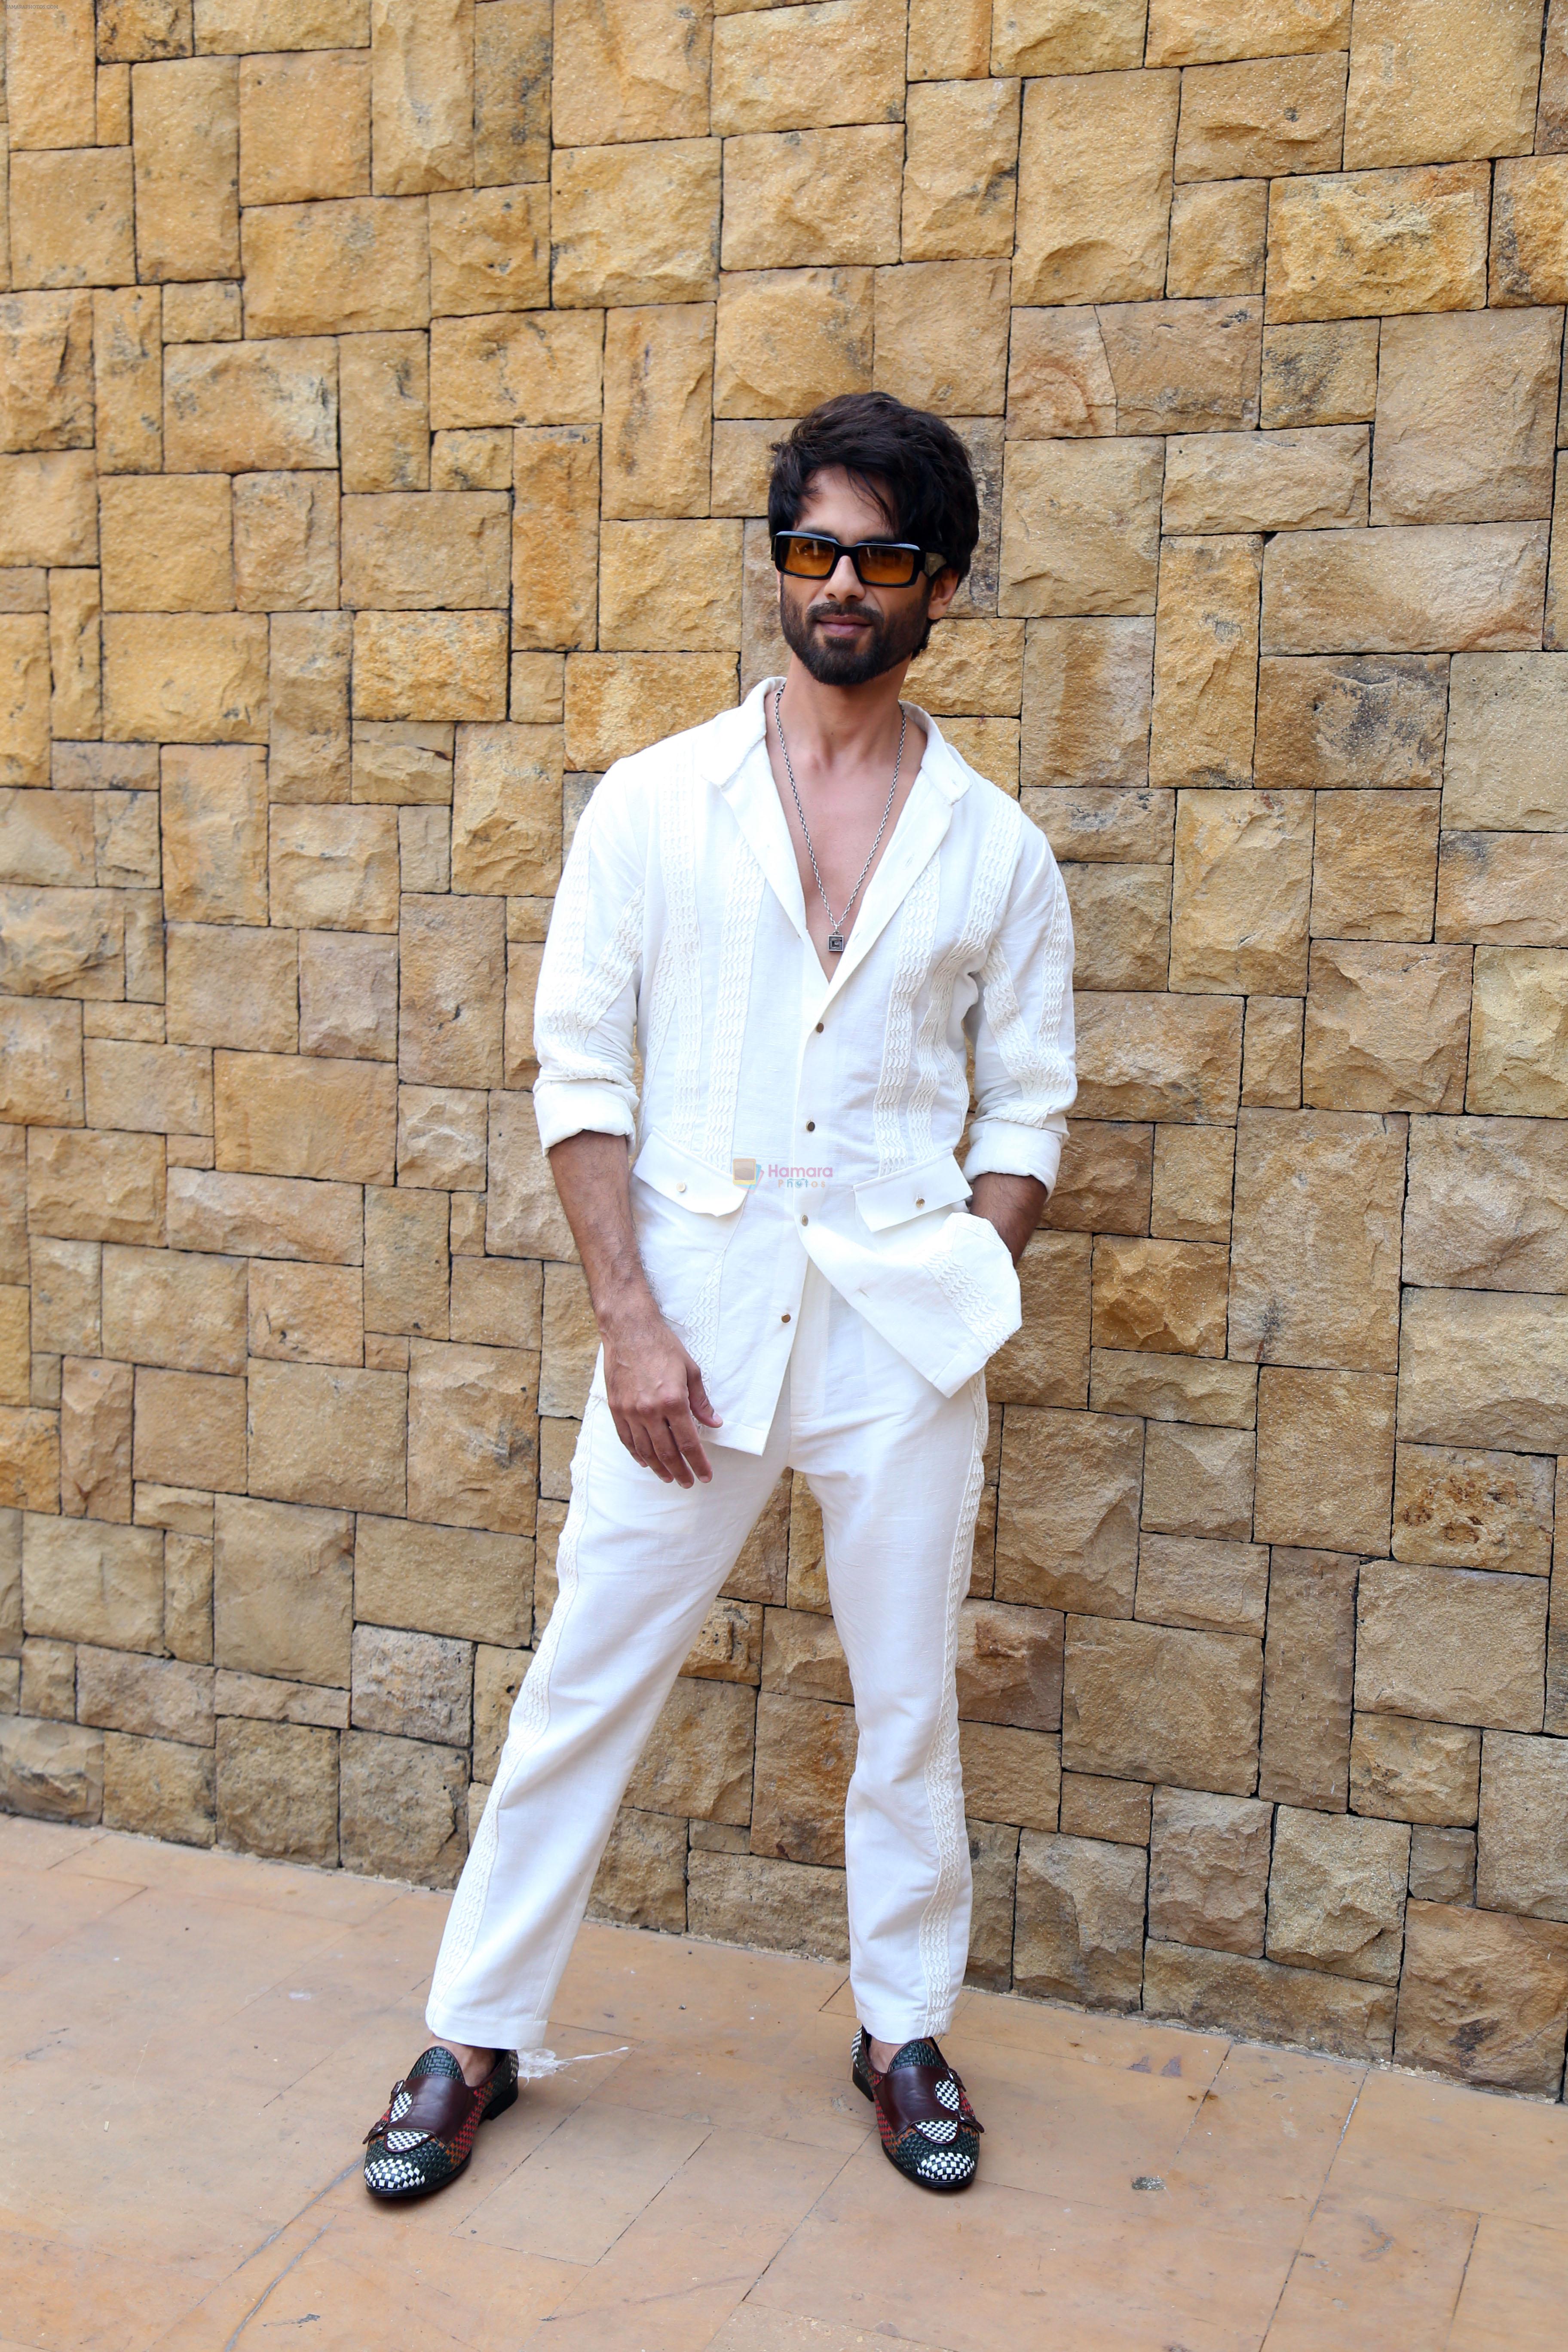 Shahid Kapoor dressed in white shirt and pant and sunglasses promoting his film Bloody Daddy